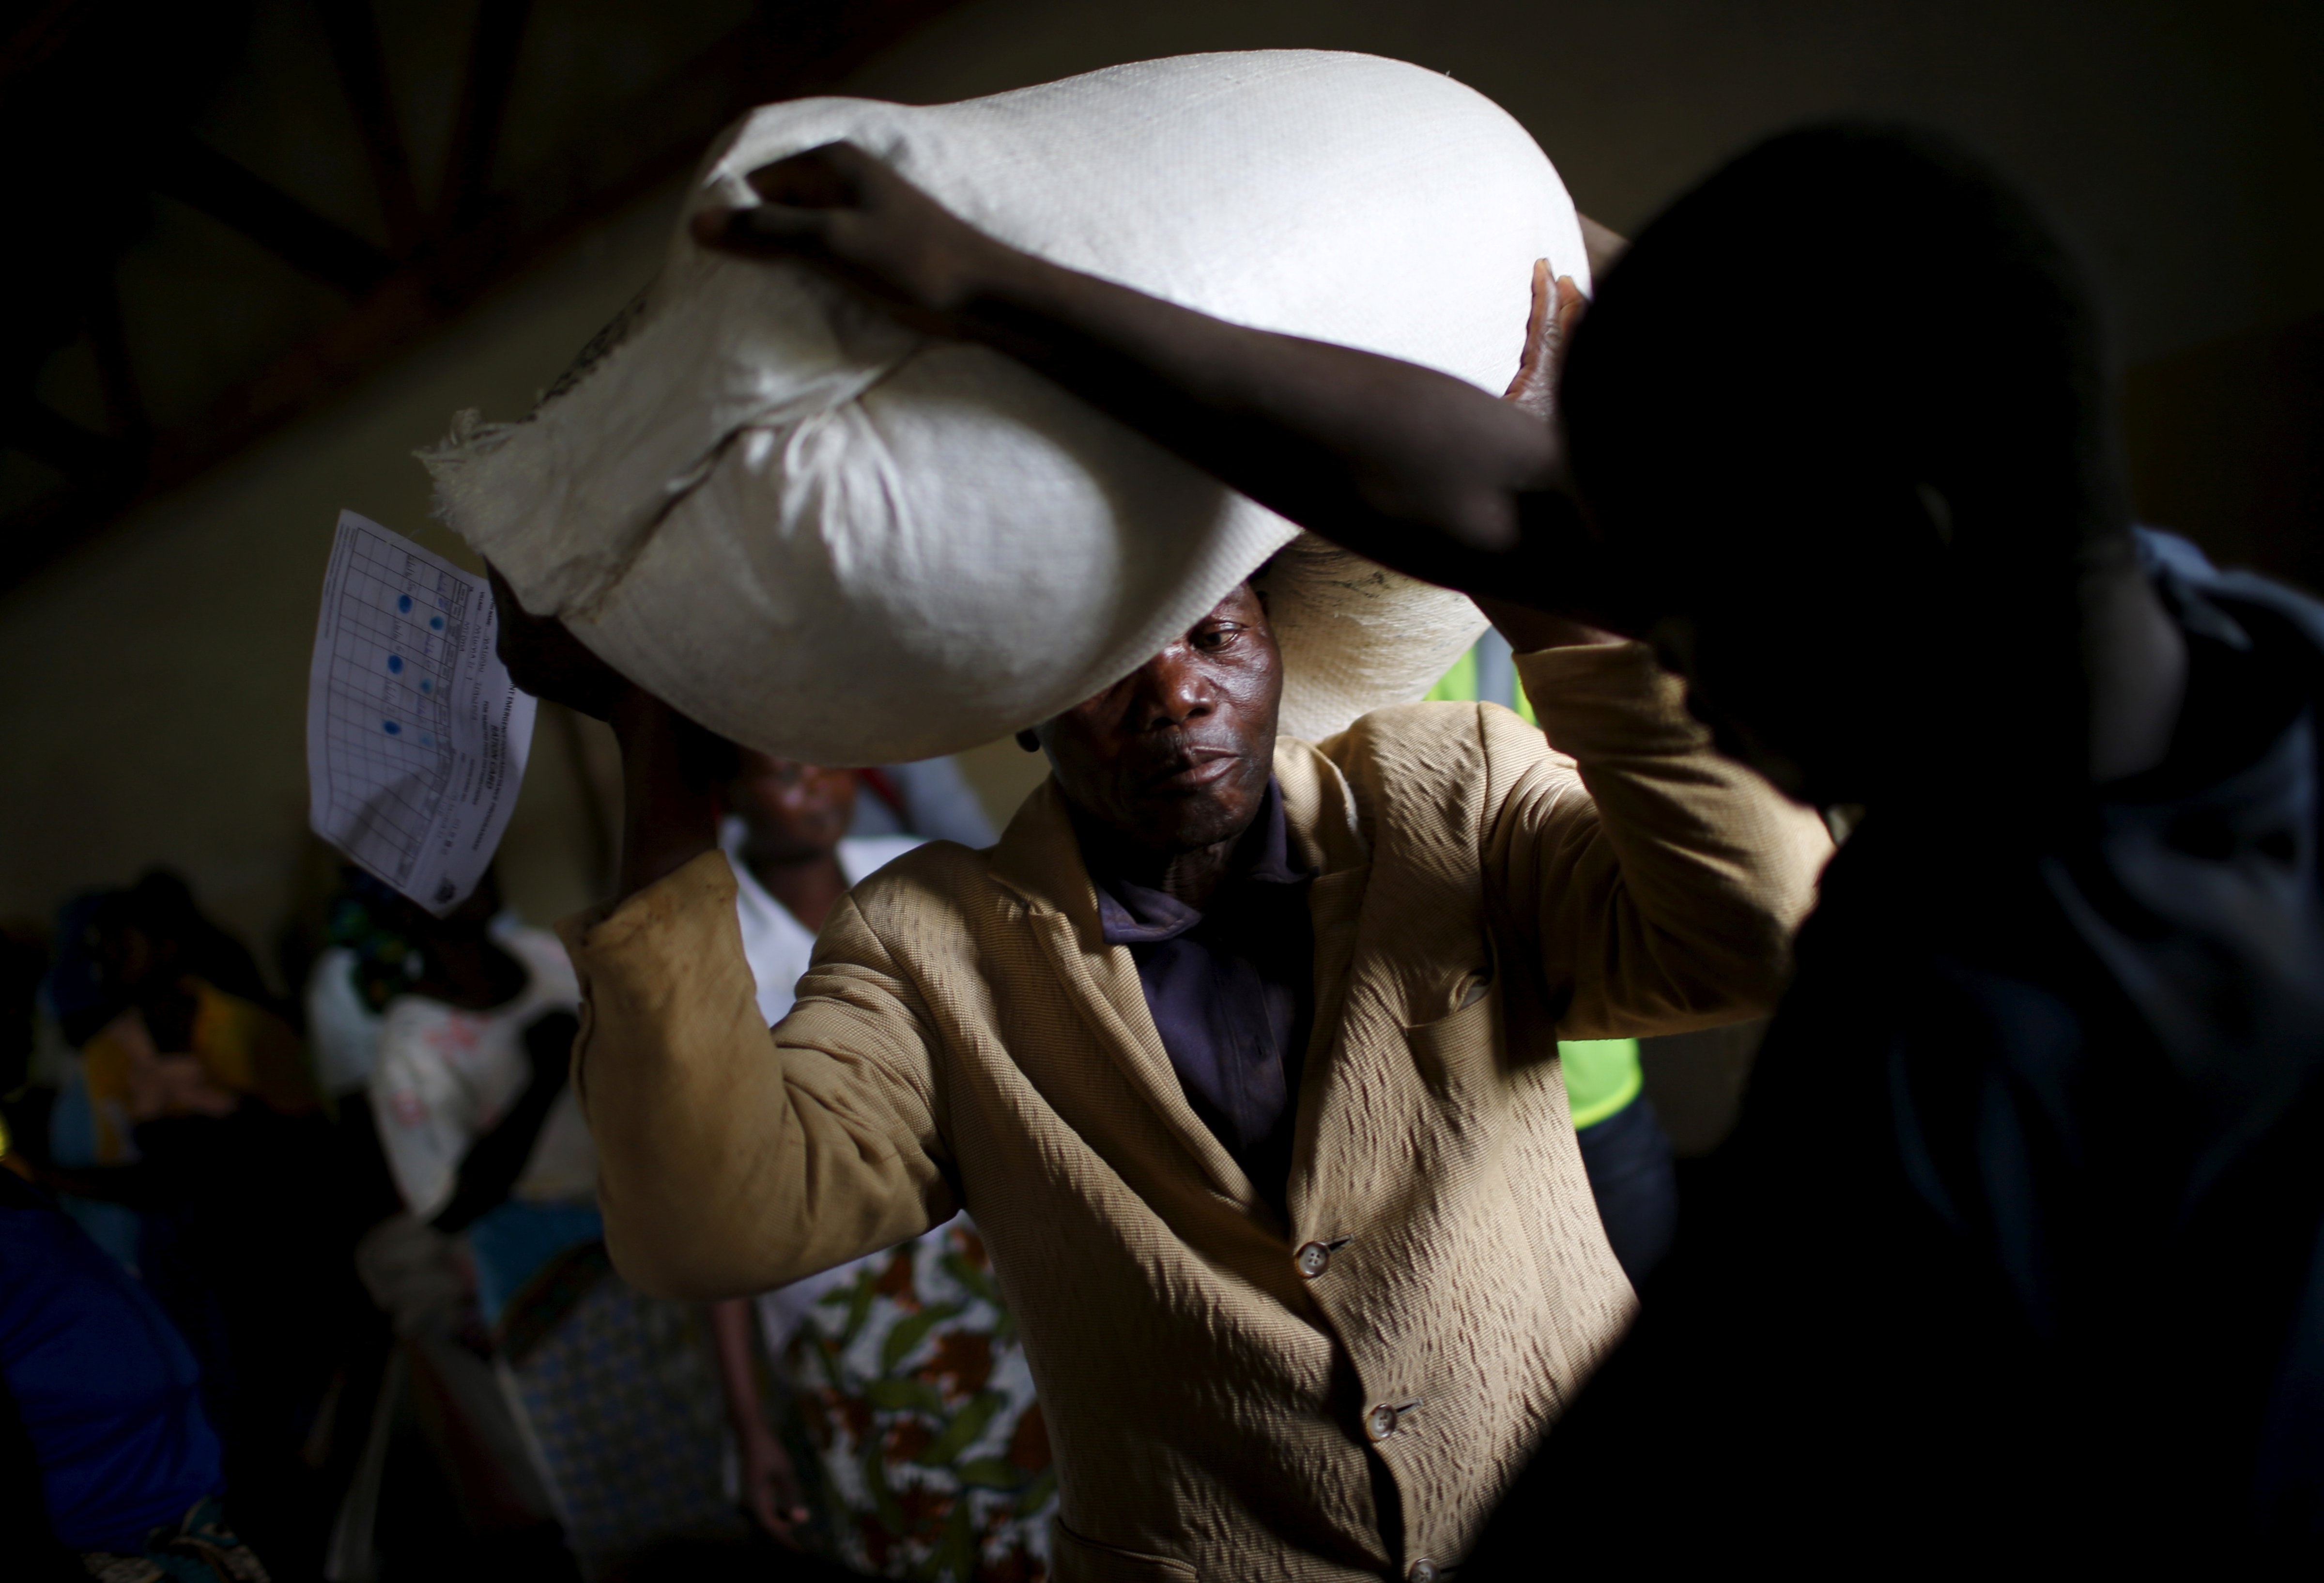 A man carries food aid distributed by the United Nations World Food Progamme (WFP) in Mzumazi village near Malawi's capital Lilongwe, Feb. 3, 2016. (Mike Hutchings—Reuters)